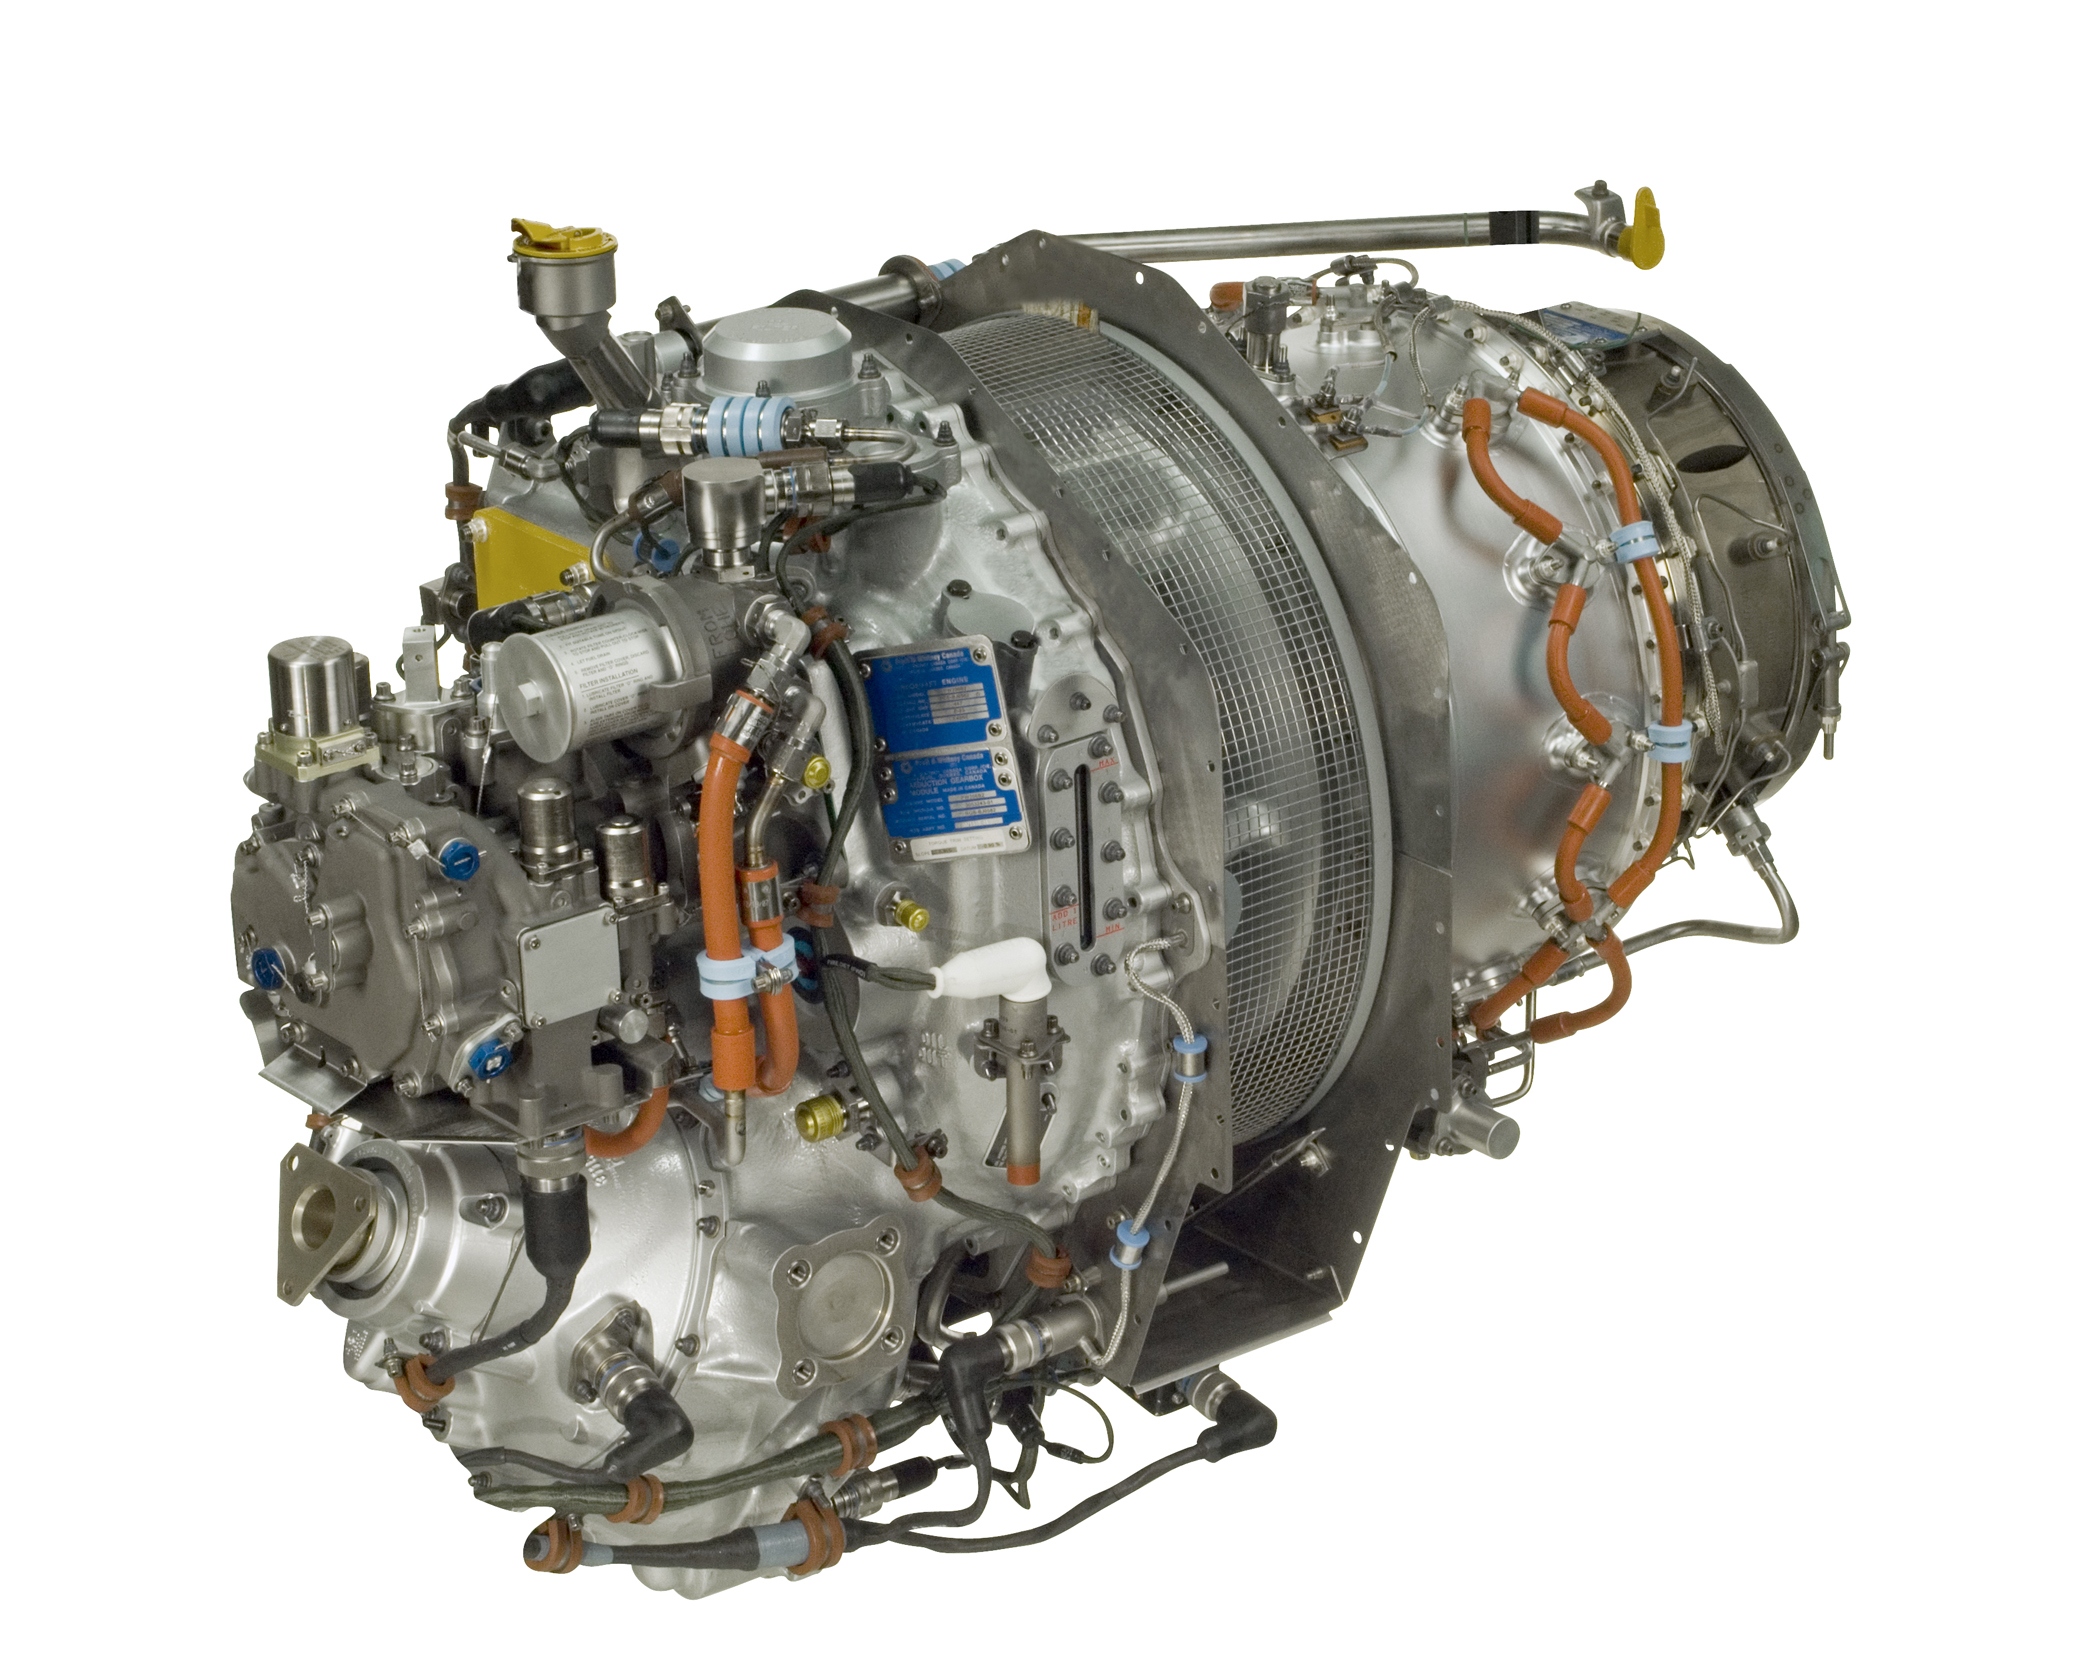 The Spanish government selects the Brad & Whitney Canada PW206B3 engines